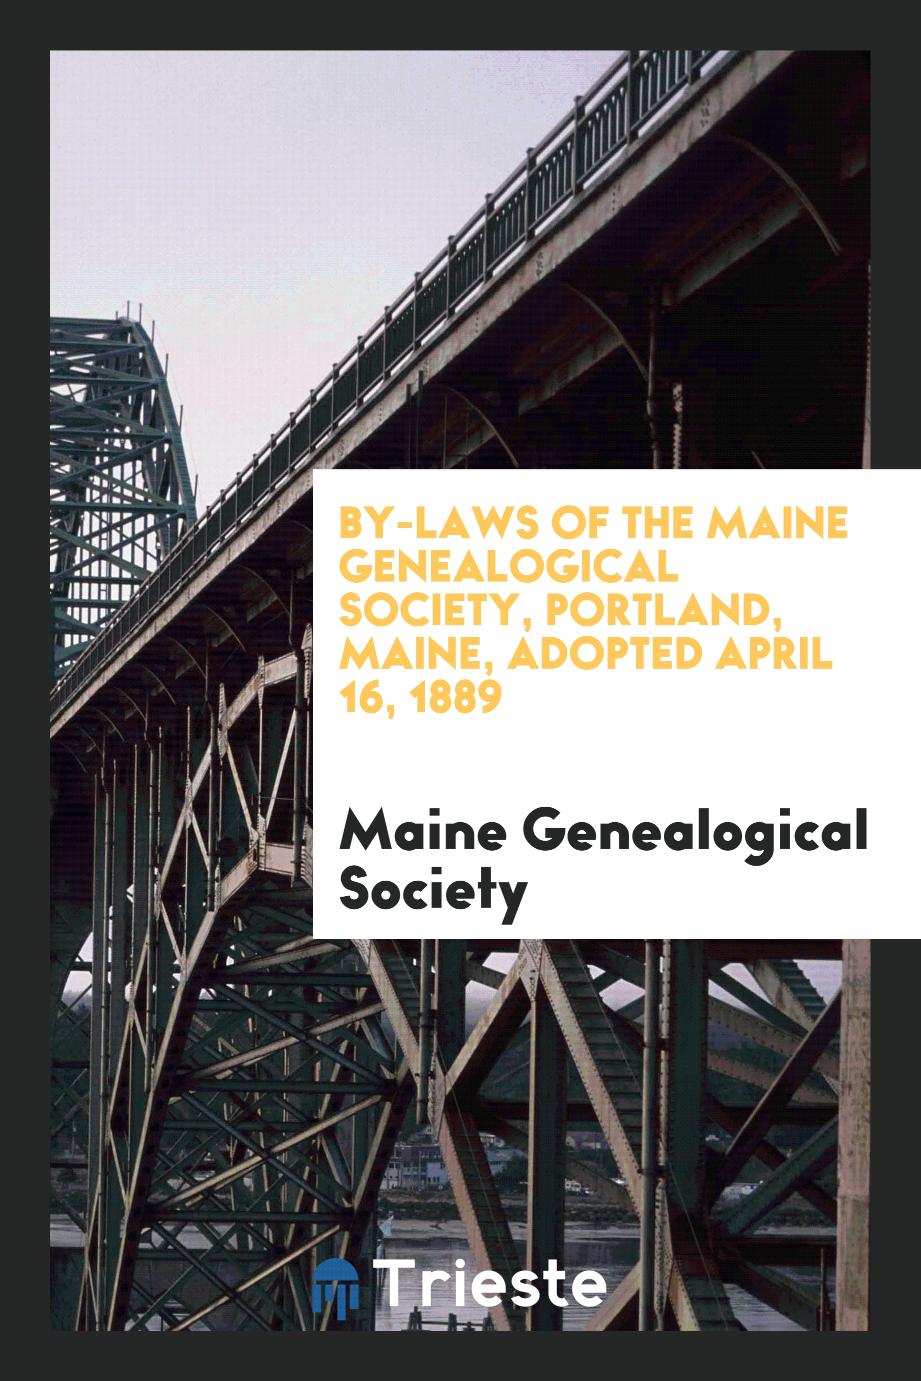 By-laws of the Maine genealogical society, Portland, Maine, Adopted April 16, 1889